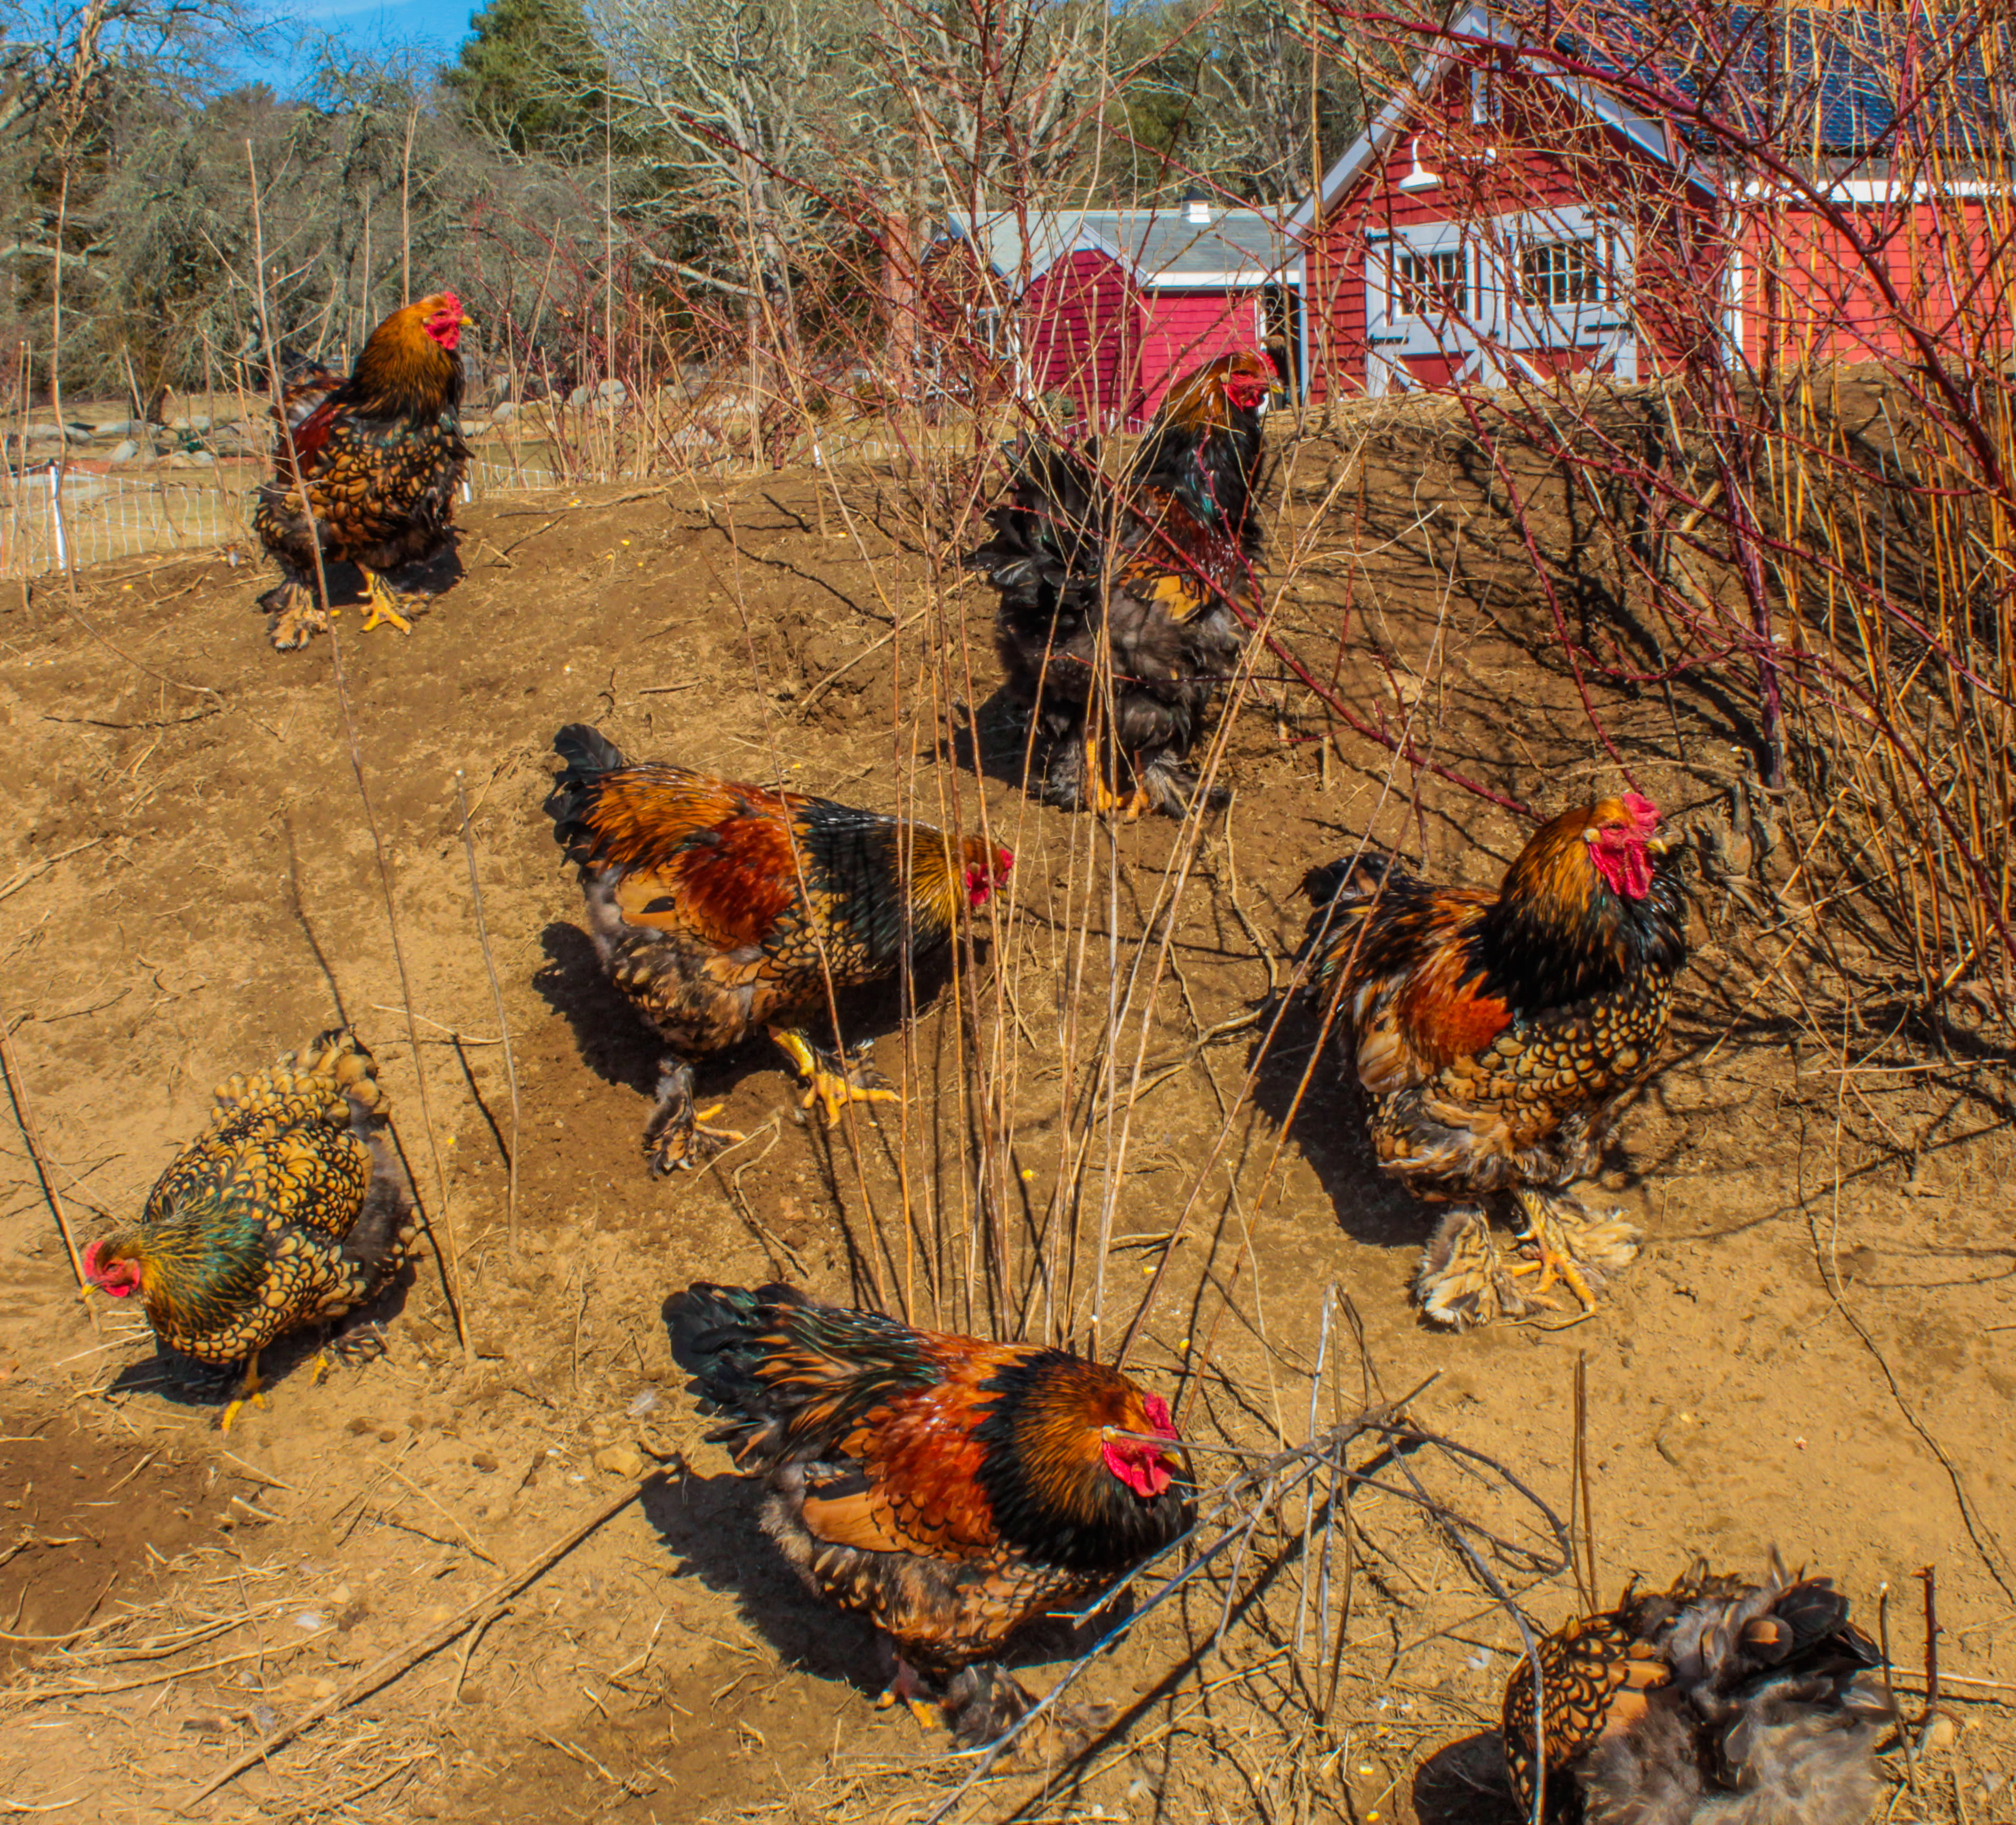 Gold-laced Brahma Chickens at Lavender Waves Farm